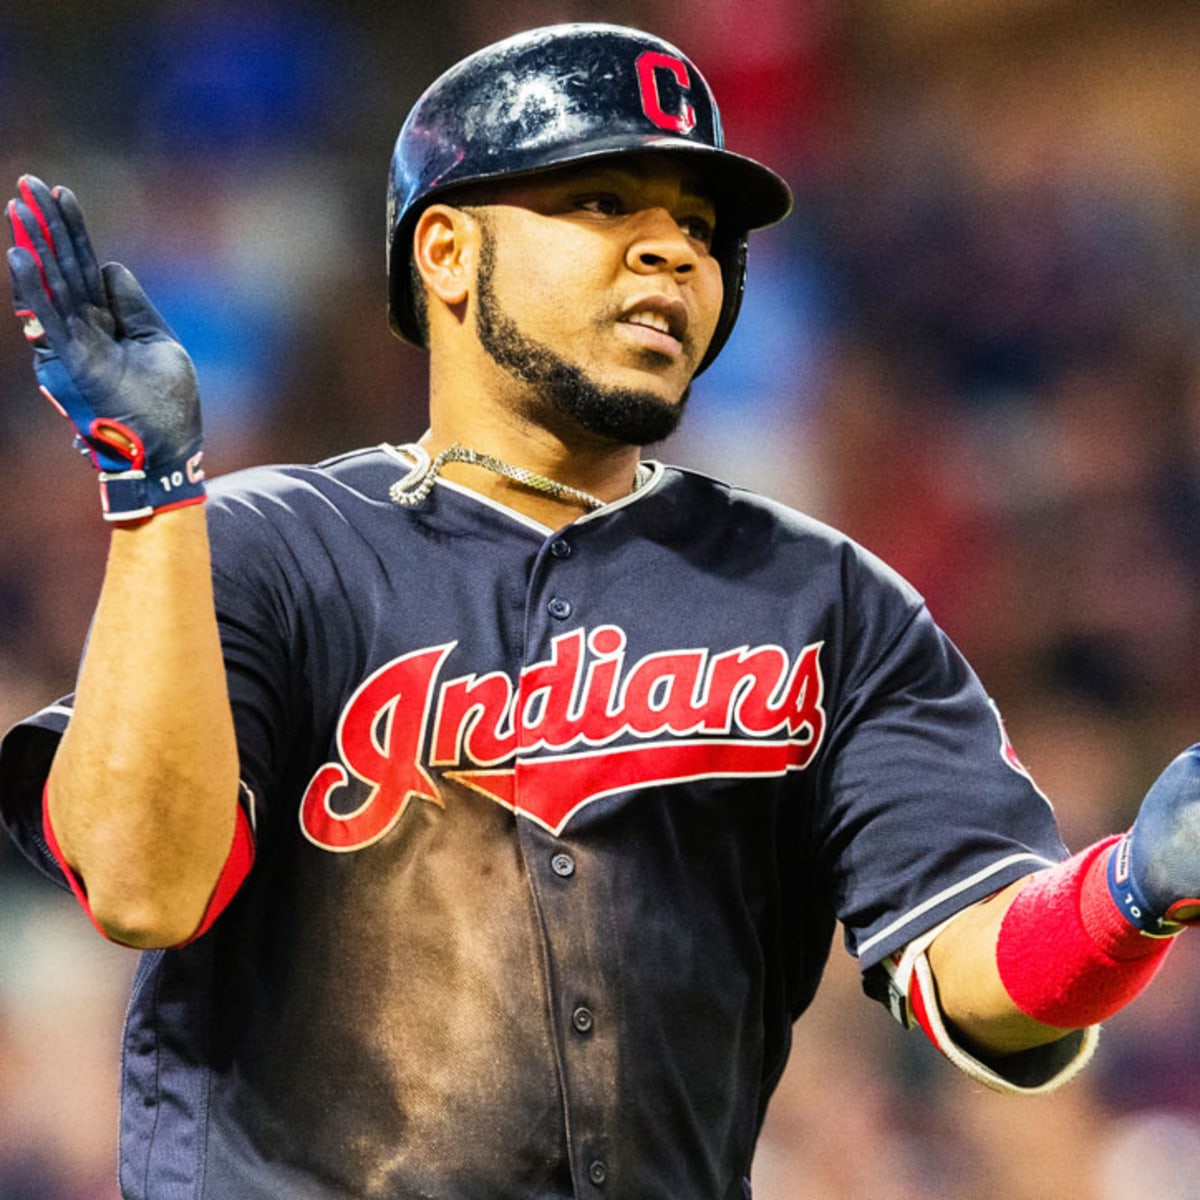 Why the Rangers could sign Edwin Encarnacion and why it is still unlikely